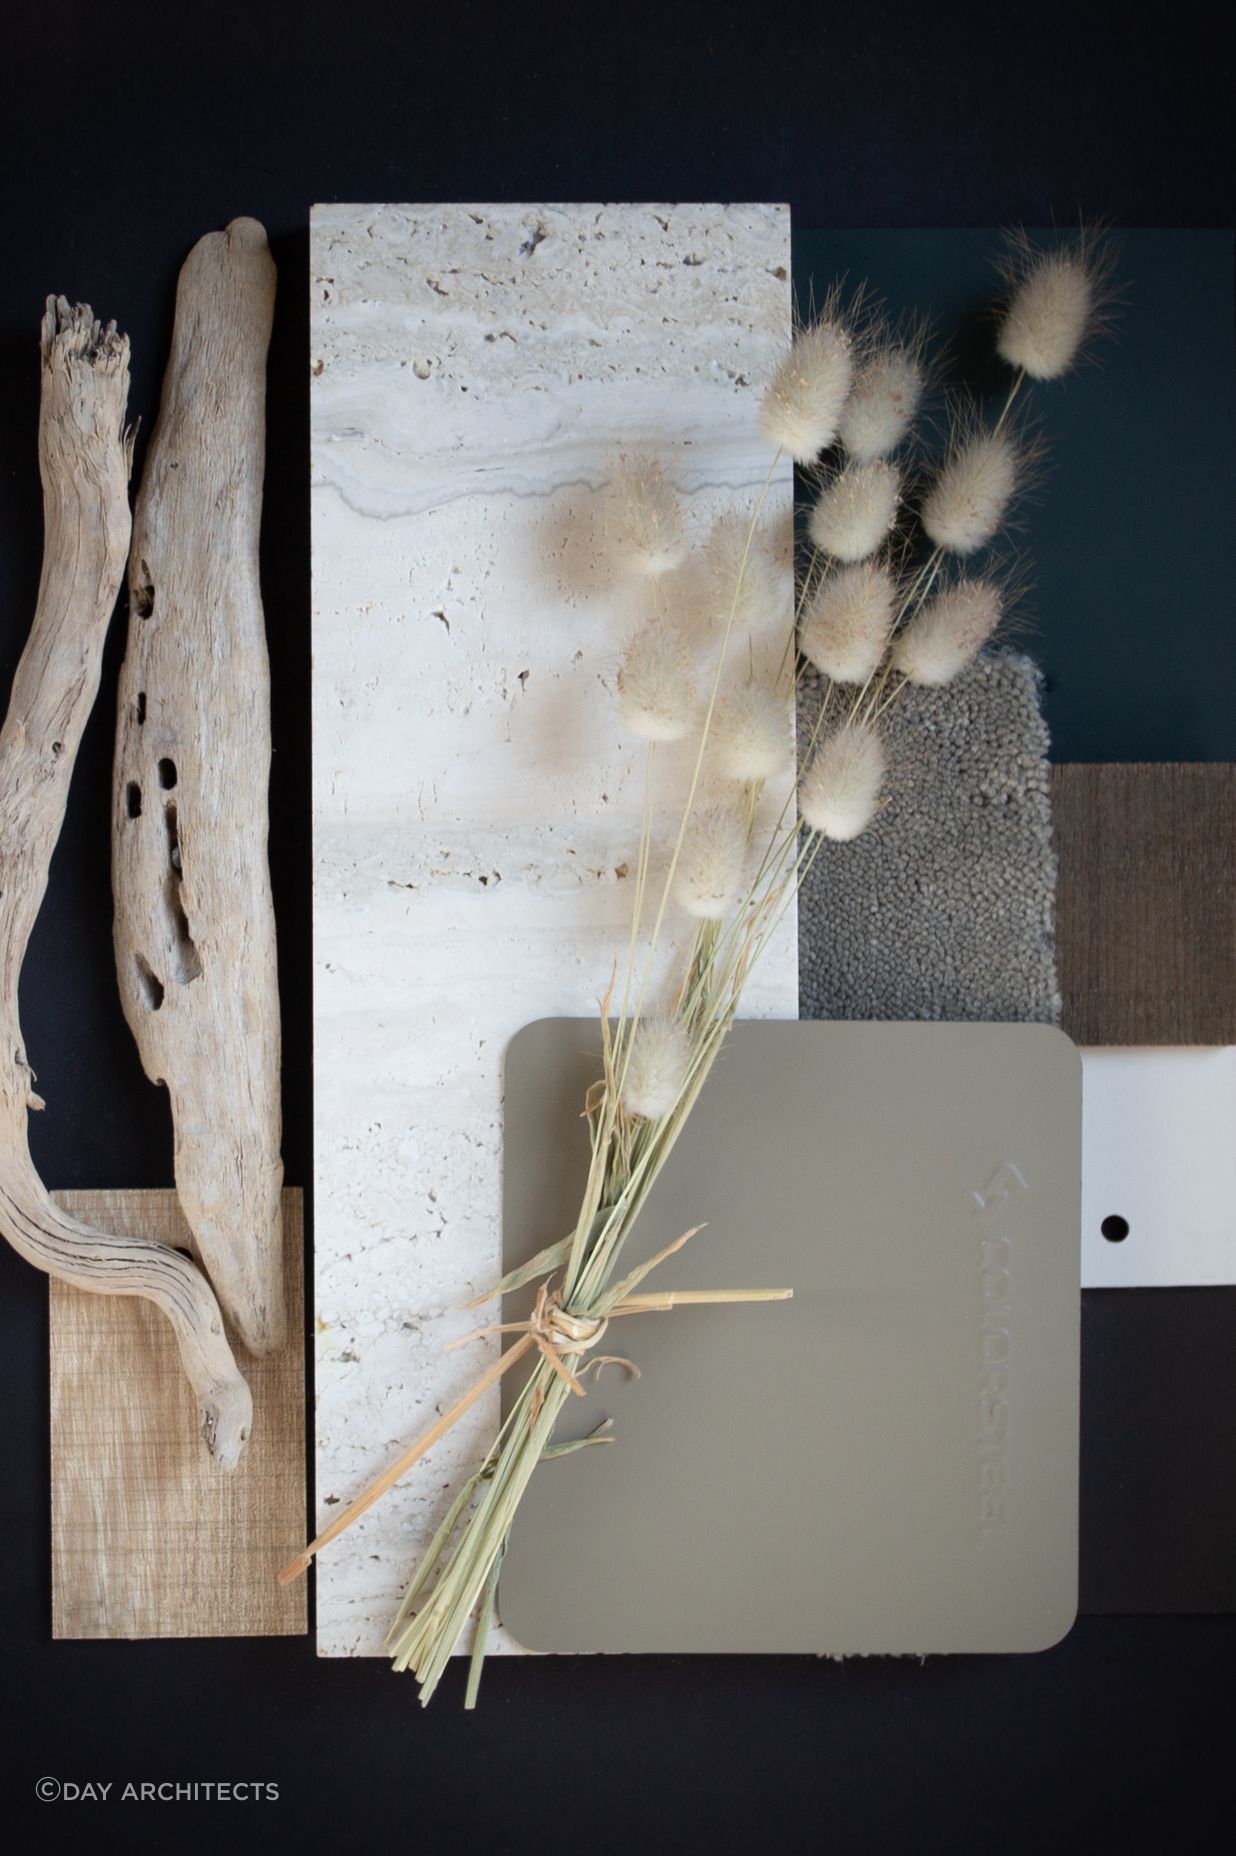 Colour: Lichen brings to mind driftwood, grasses on the sand dunes moving in the sea breeze, and a coastal home that is in tune with its environment. Natural limestone, deep greens and sage accents create a calm palette for a relaxed family home by the sea..